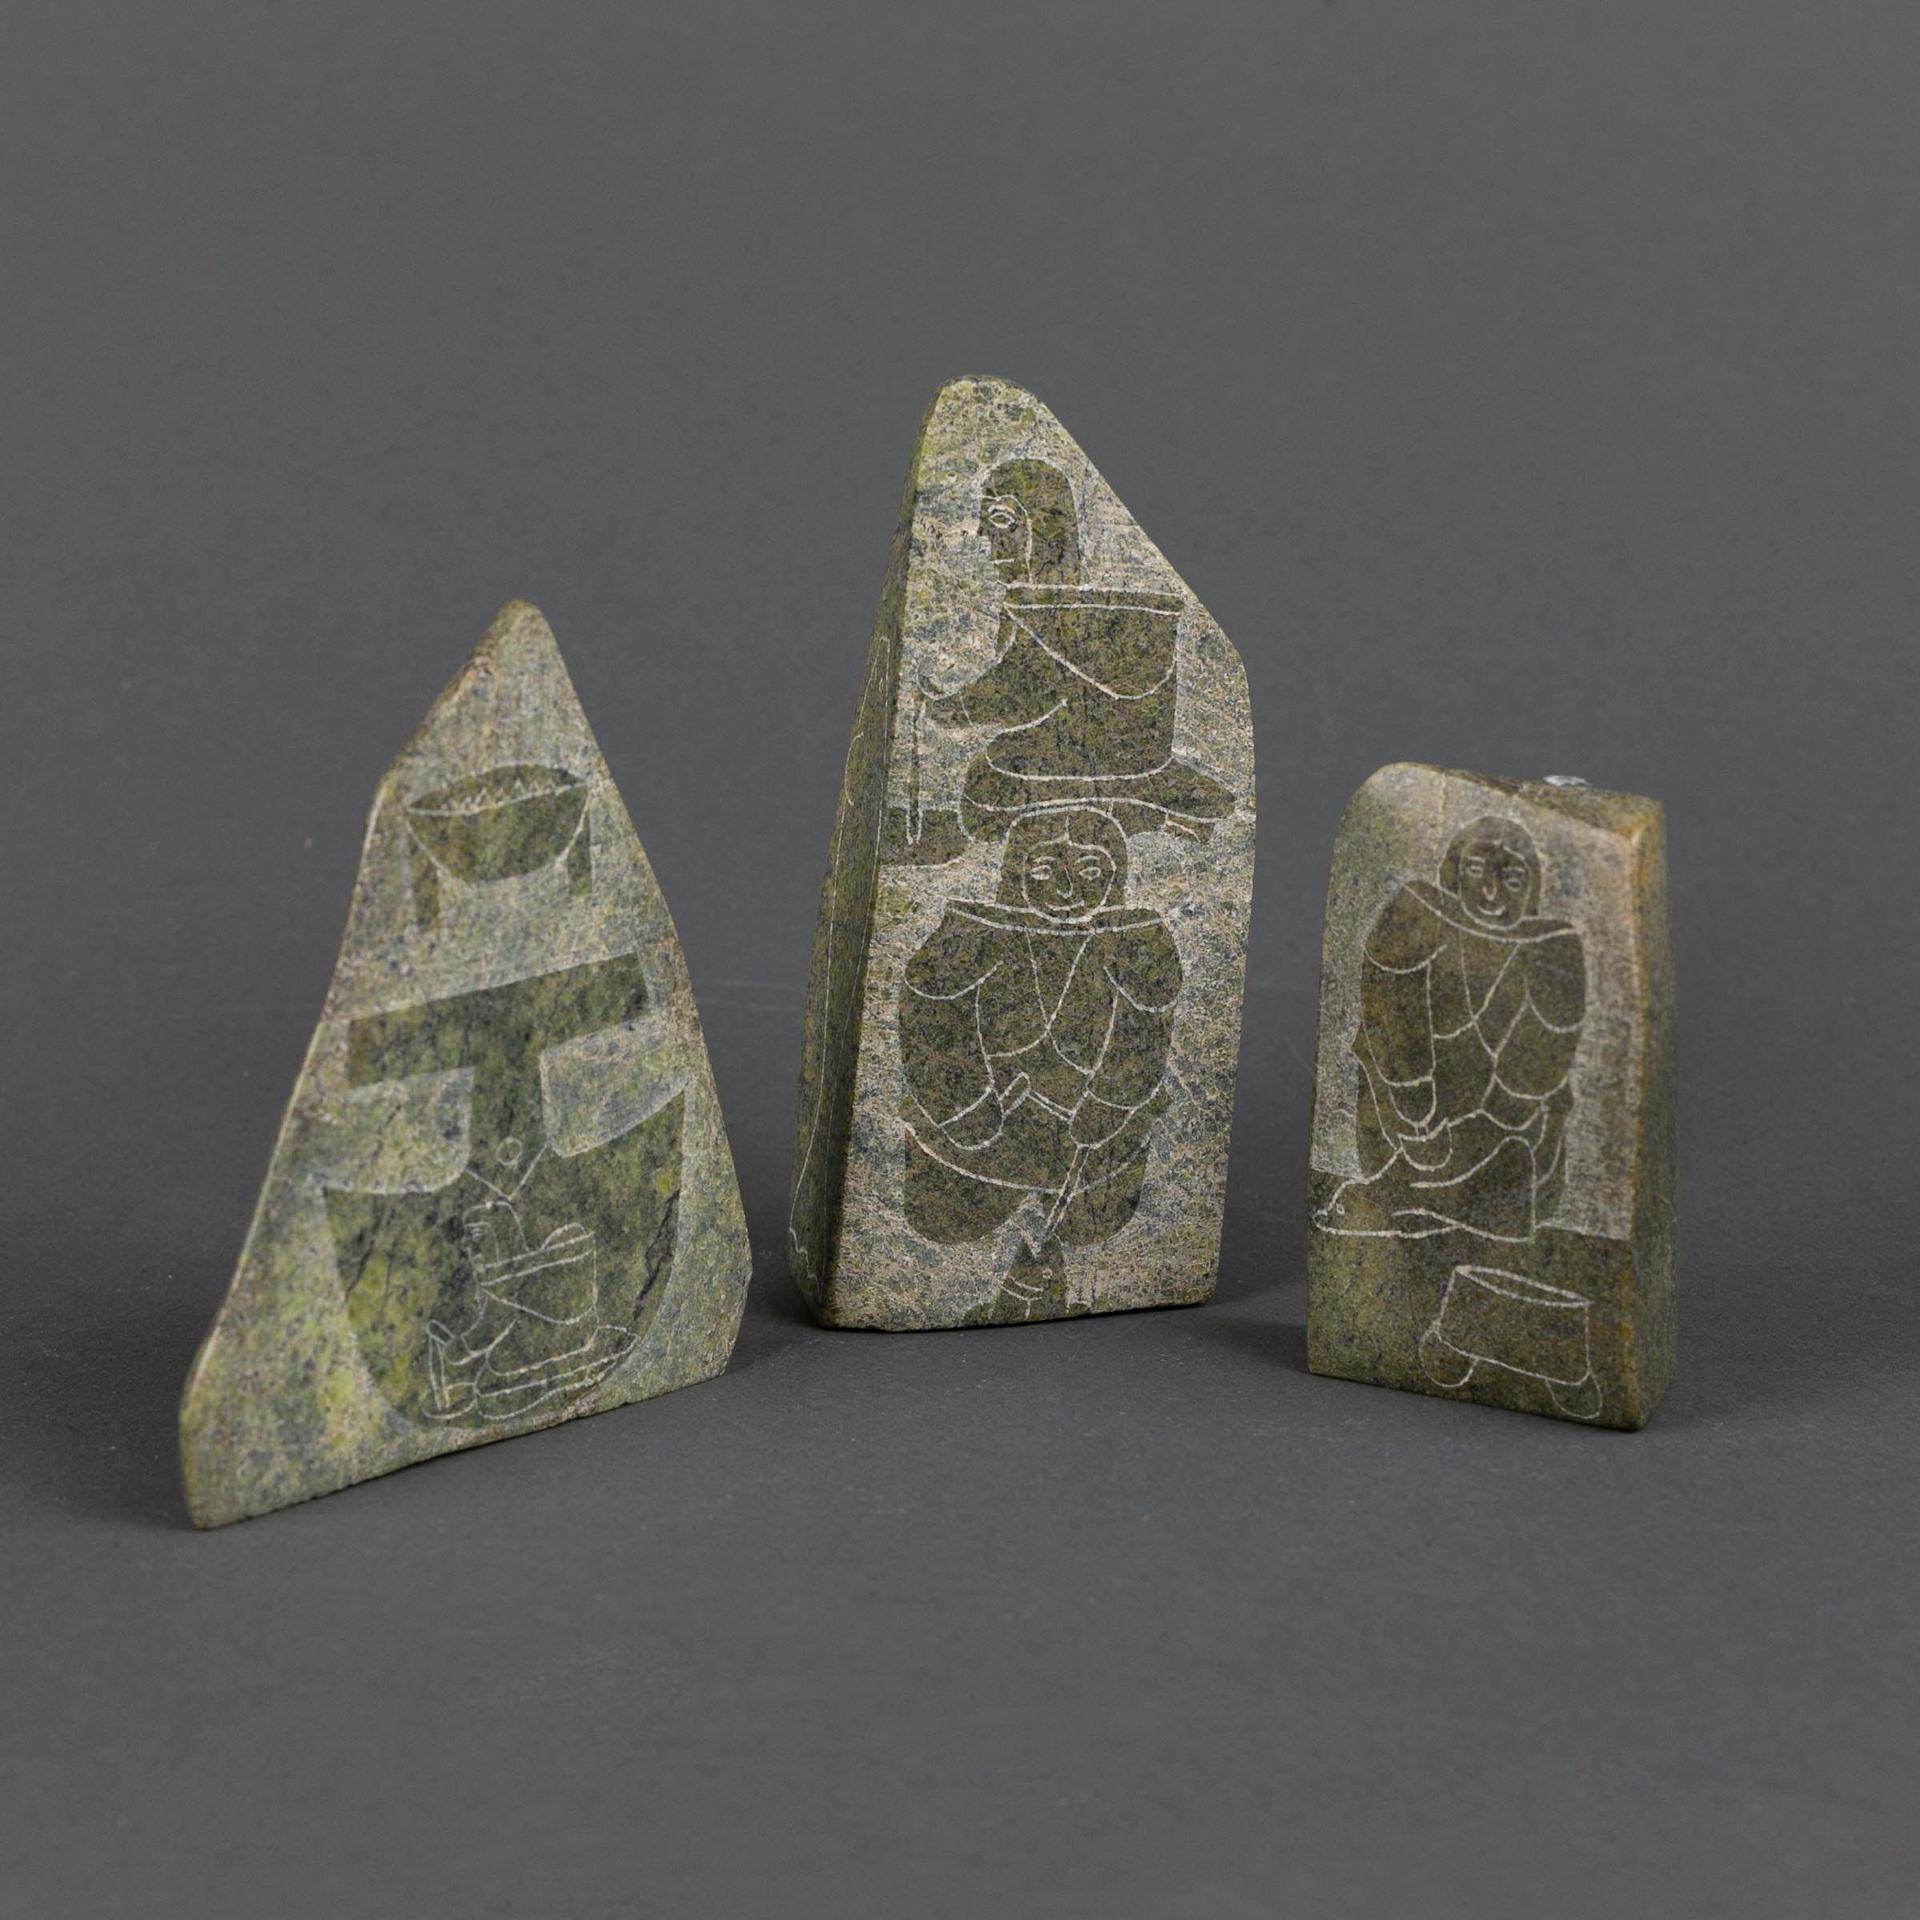 Annie Ainalik (1961) - Three Small Etchings On Soapstone